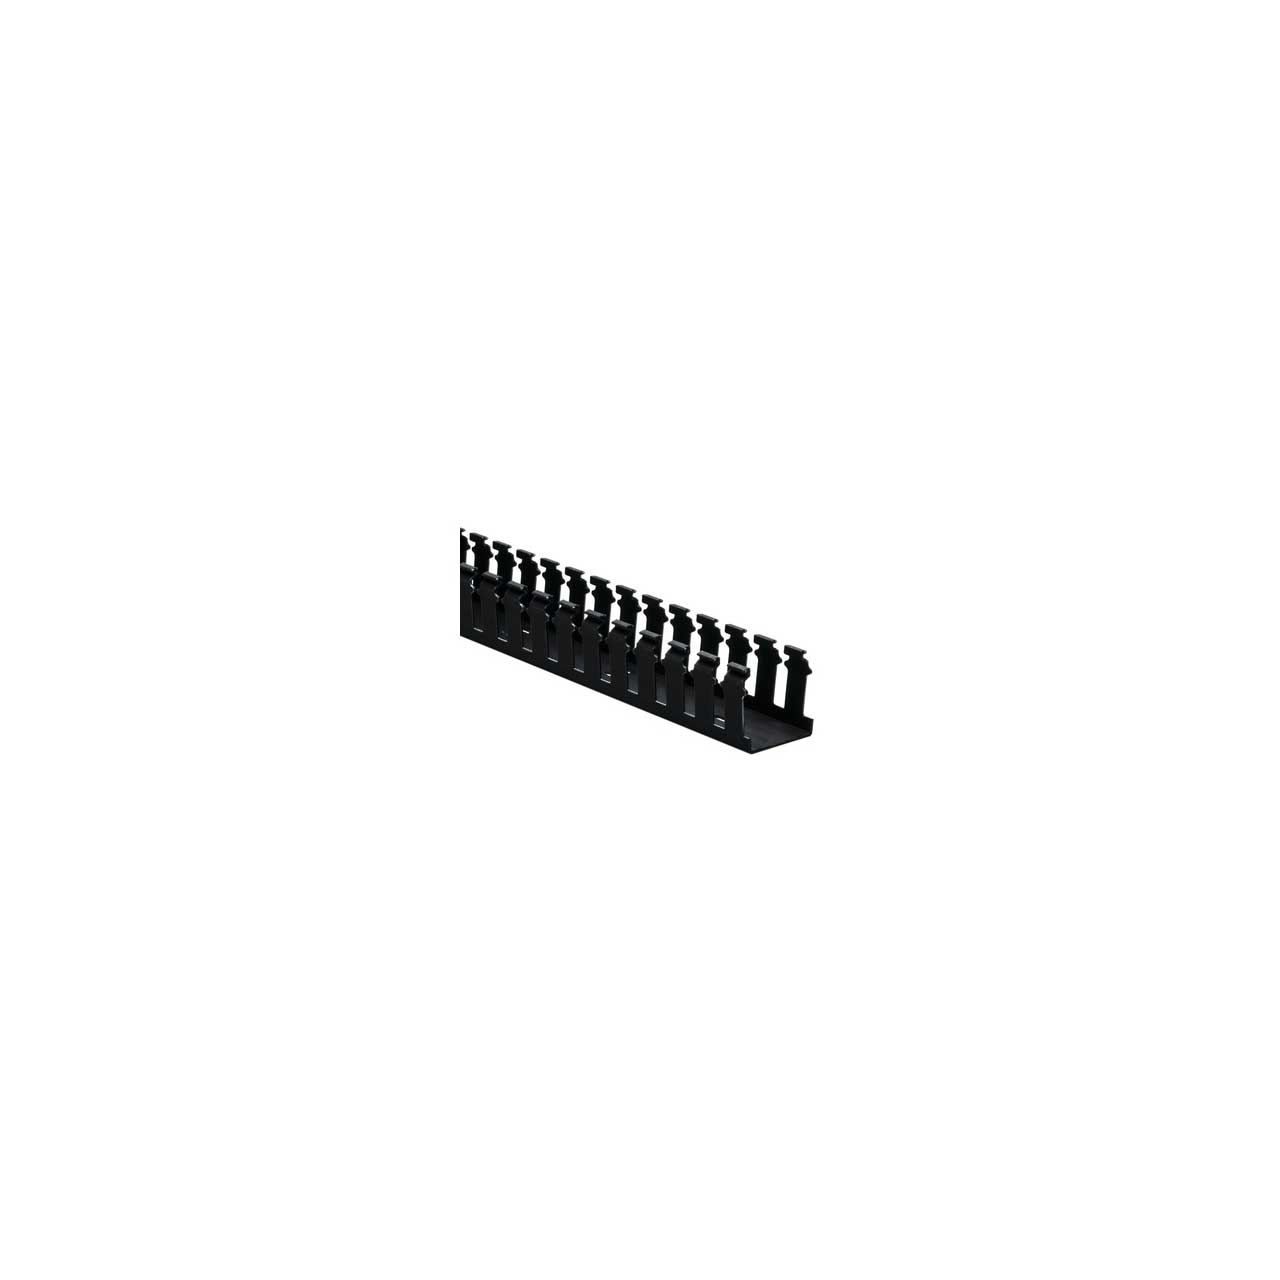 HellermannTyton 181-22020 Non-Adhesive Slotted Wall Duct 2x2-Inch x6 Foot - Black - 20 Pack 181-22020-20